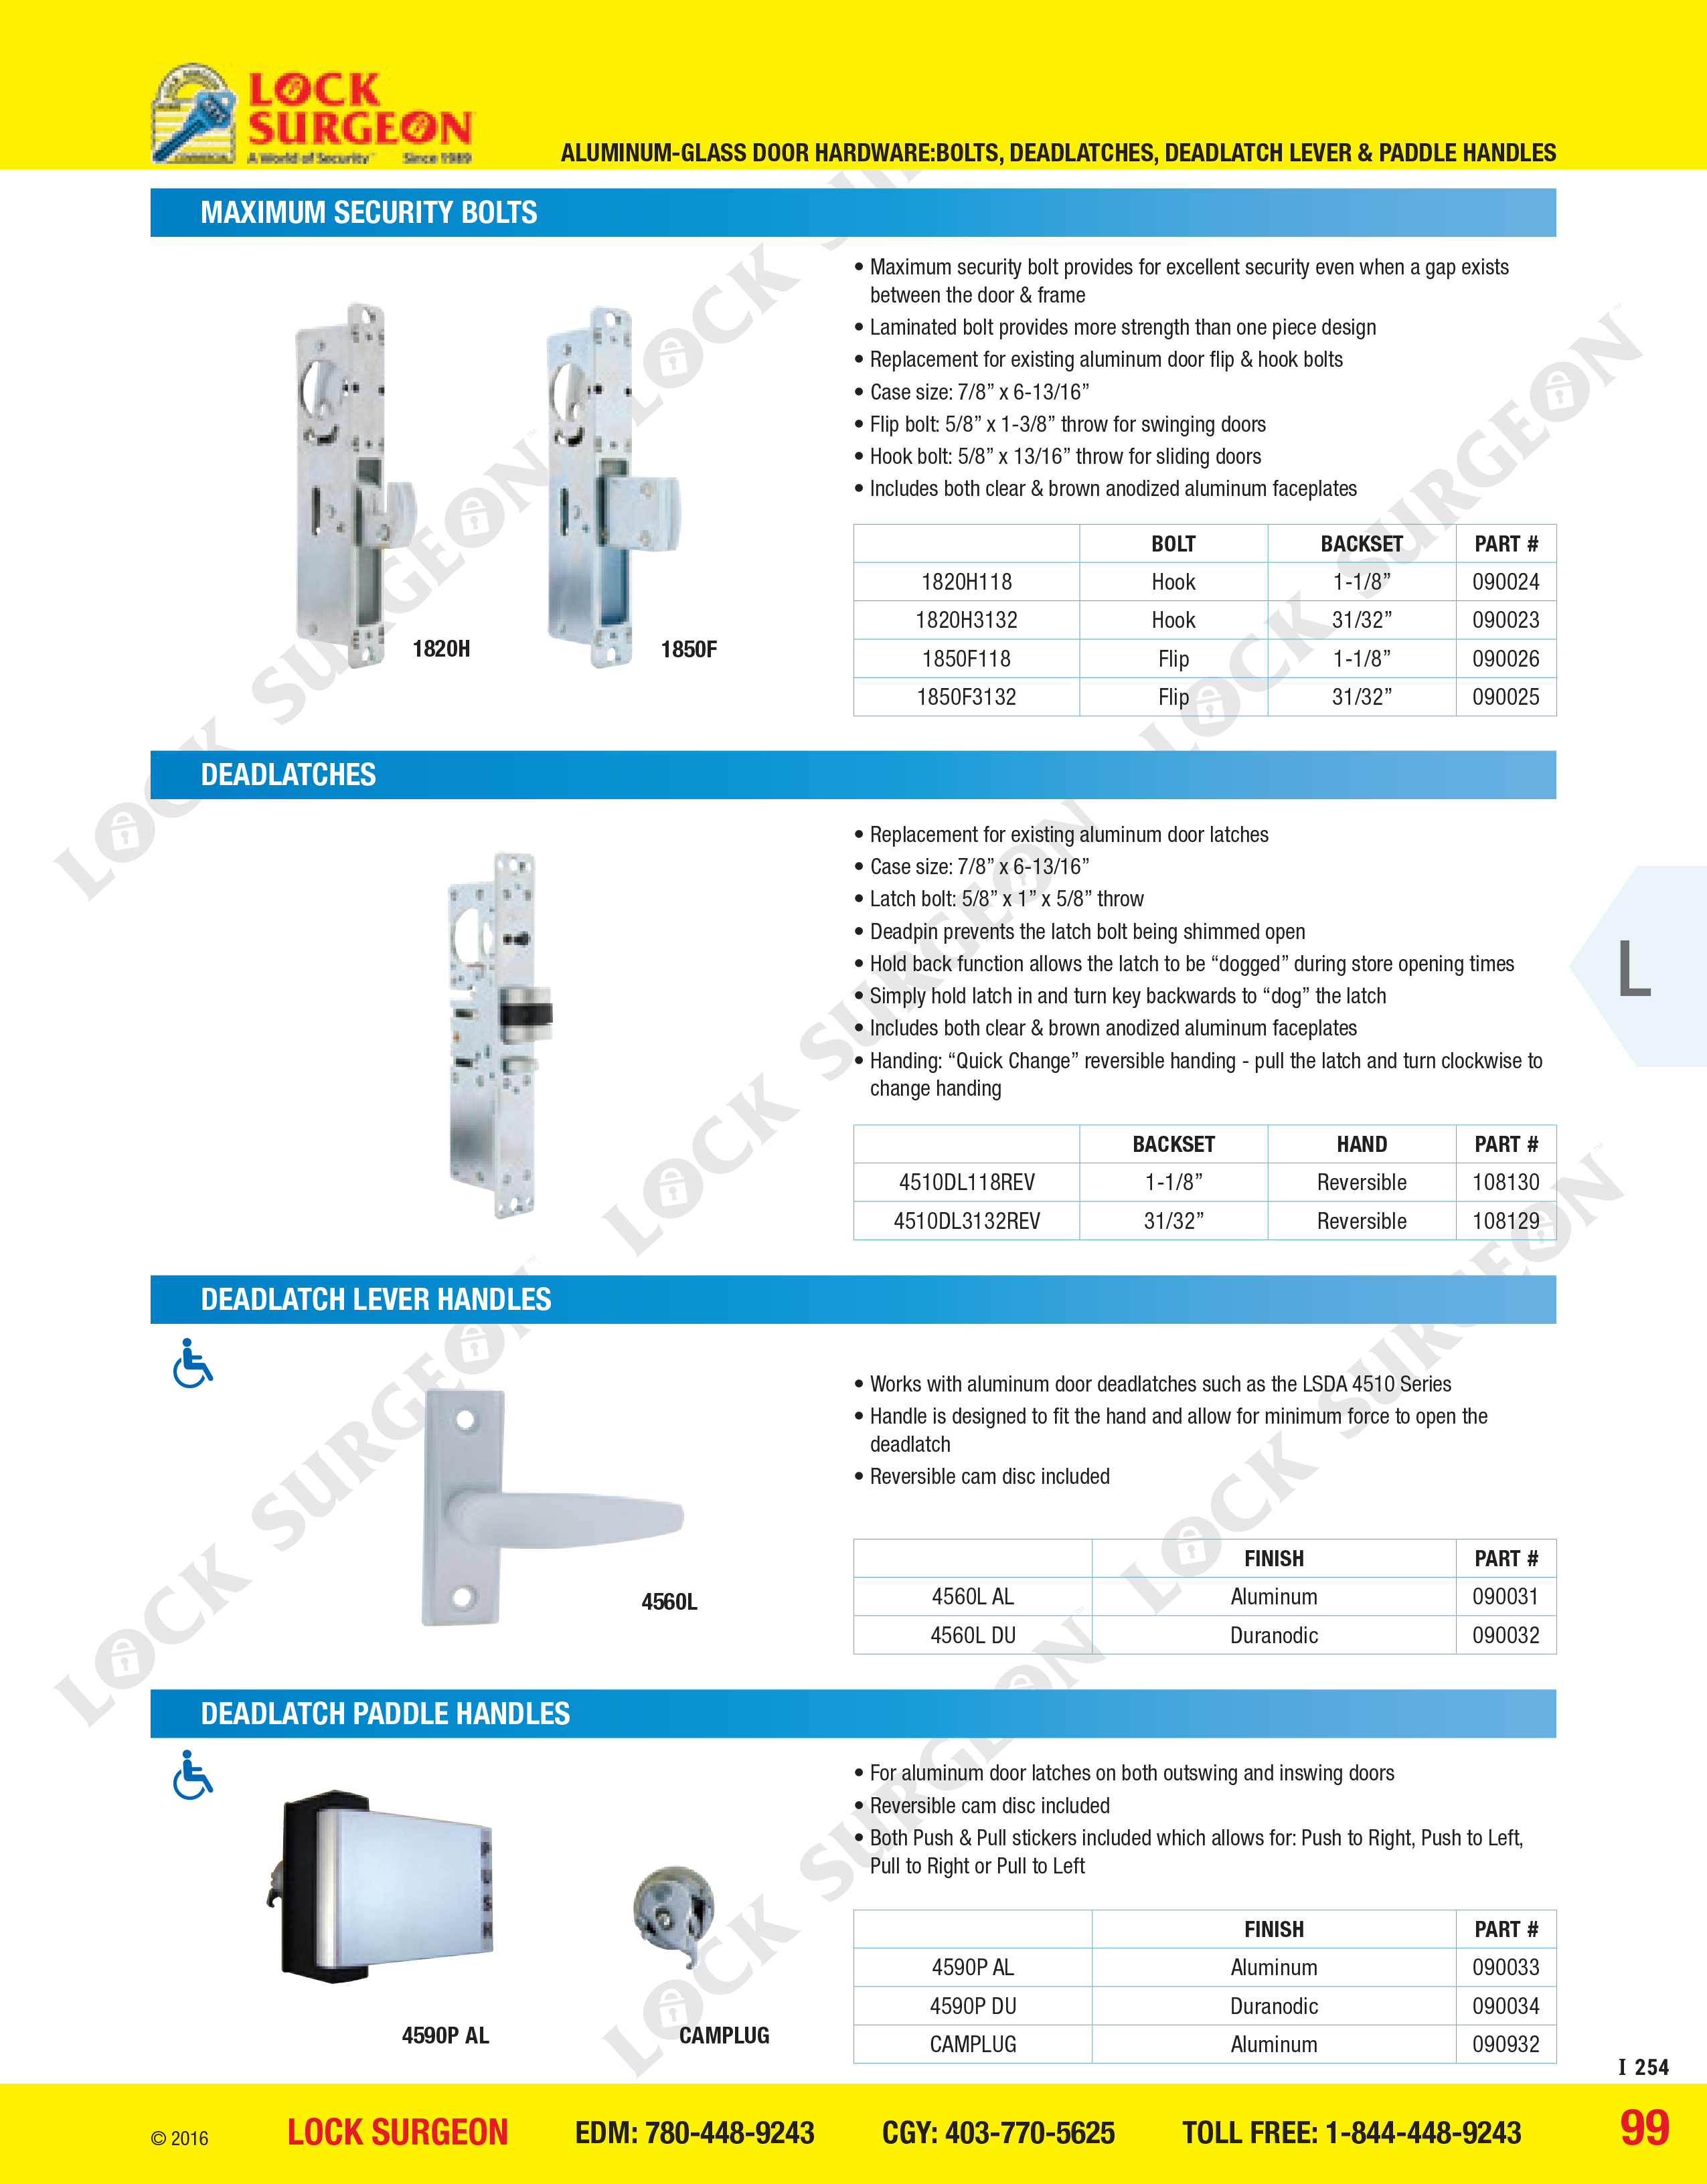 Maximum security bolts, deadlatches, deadlatch lever handles and deadlatch paddle handles Acheson.